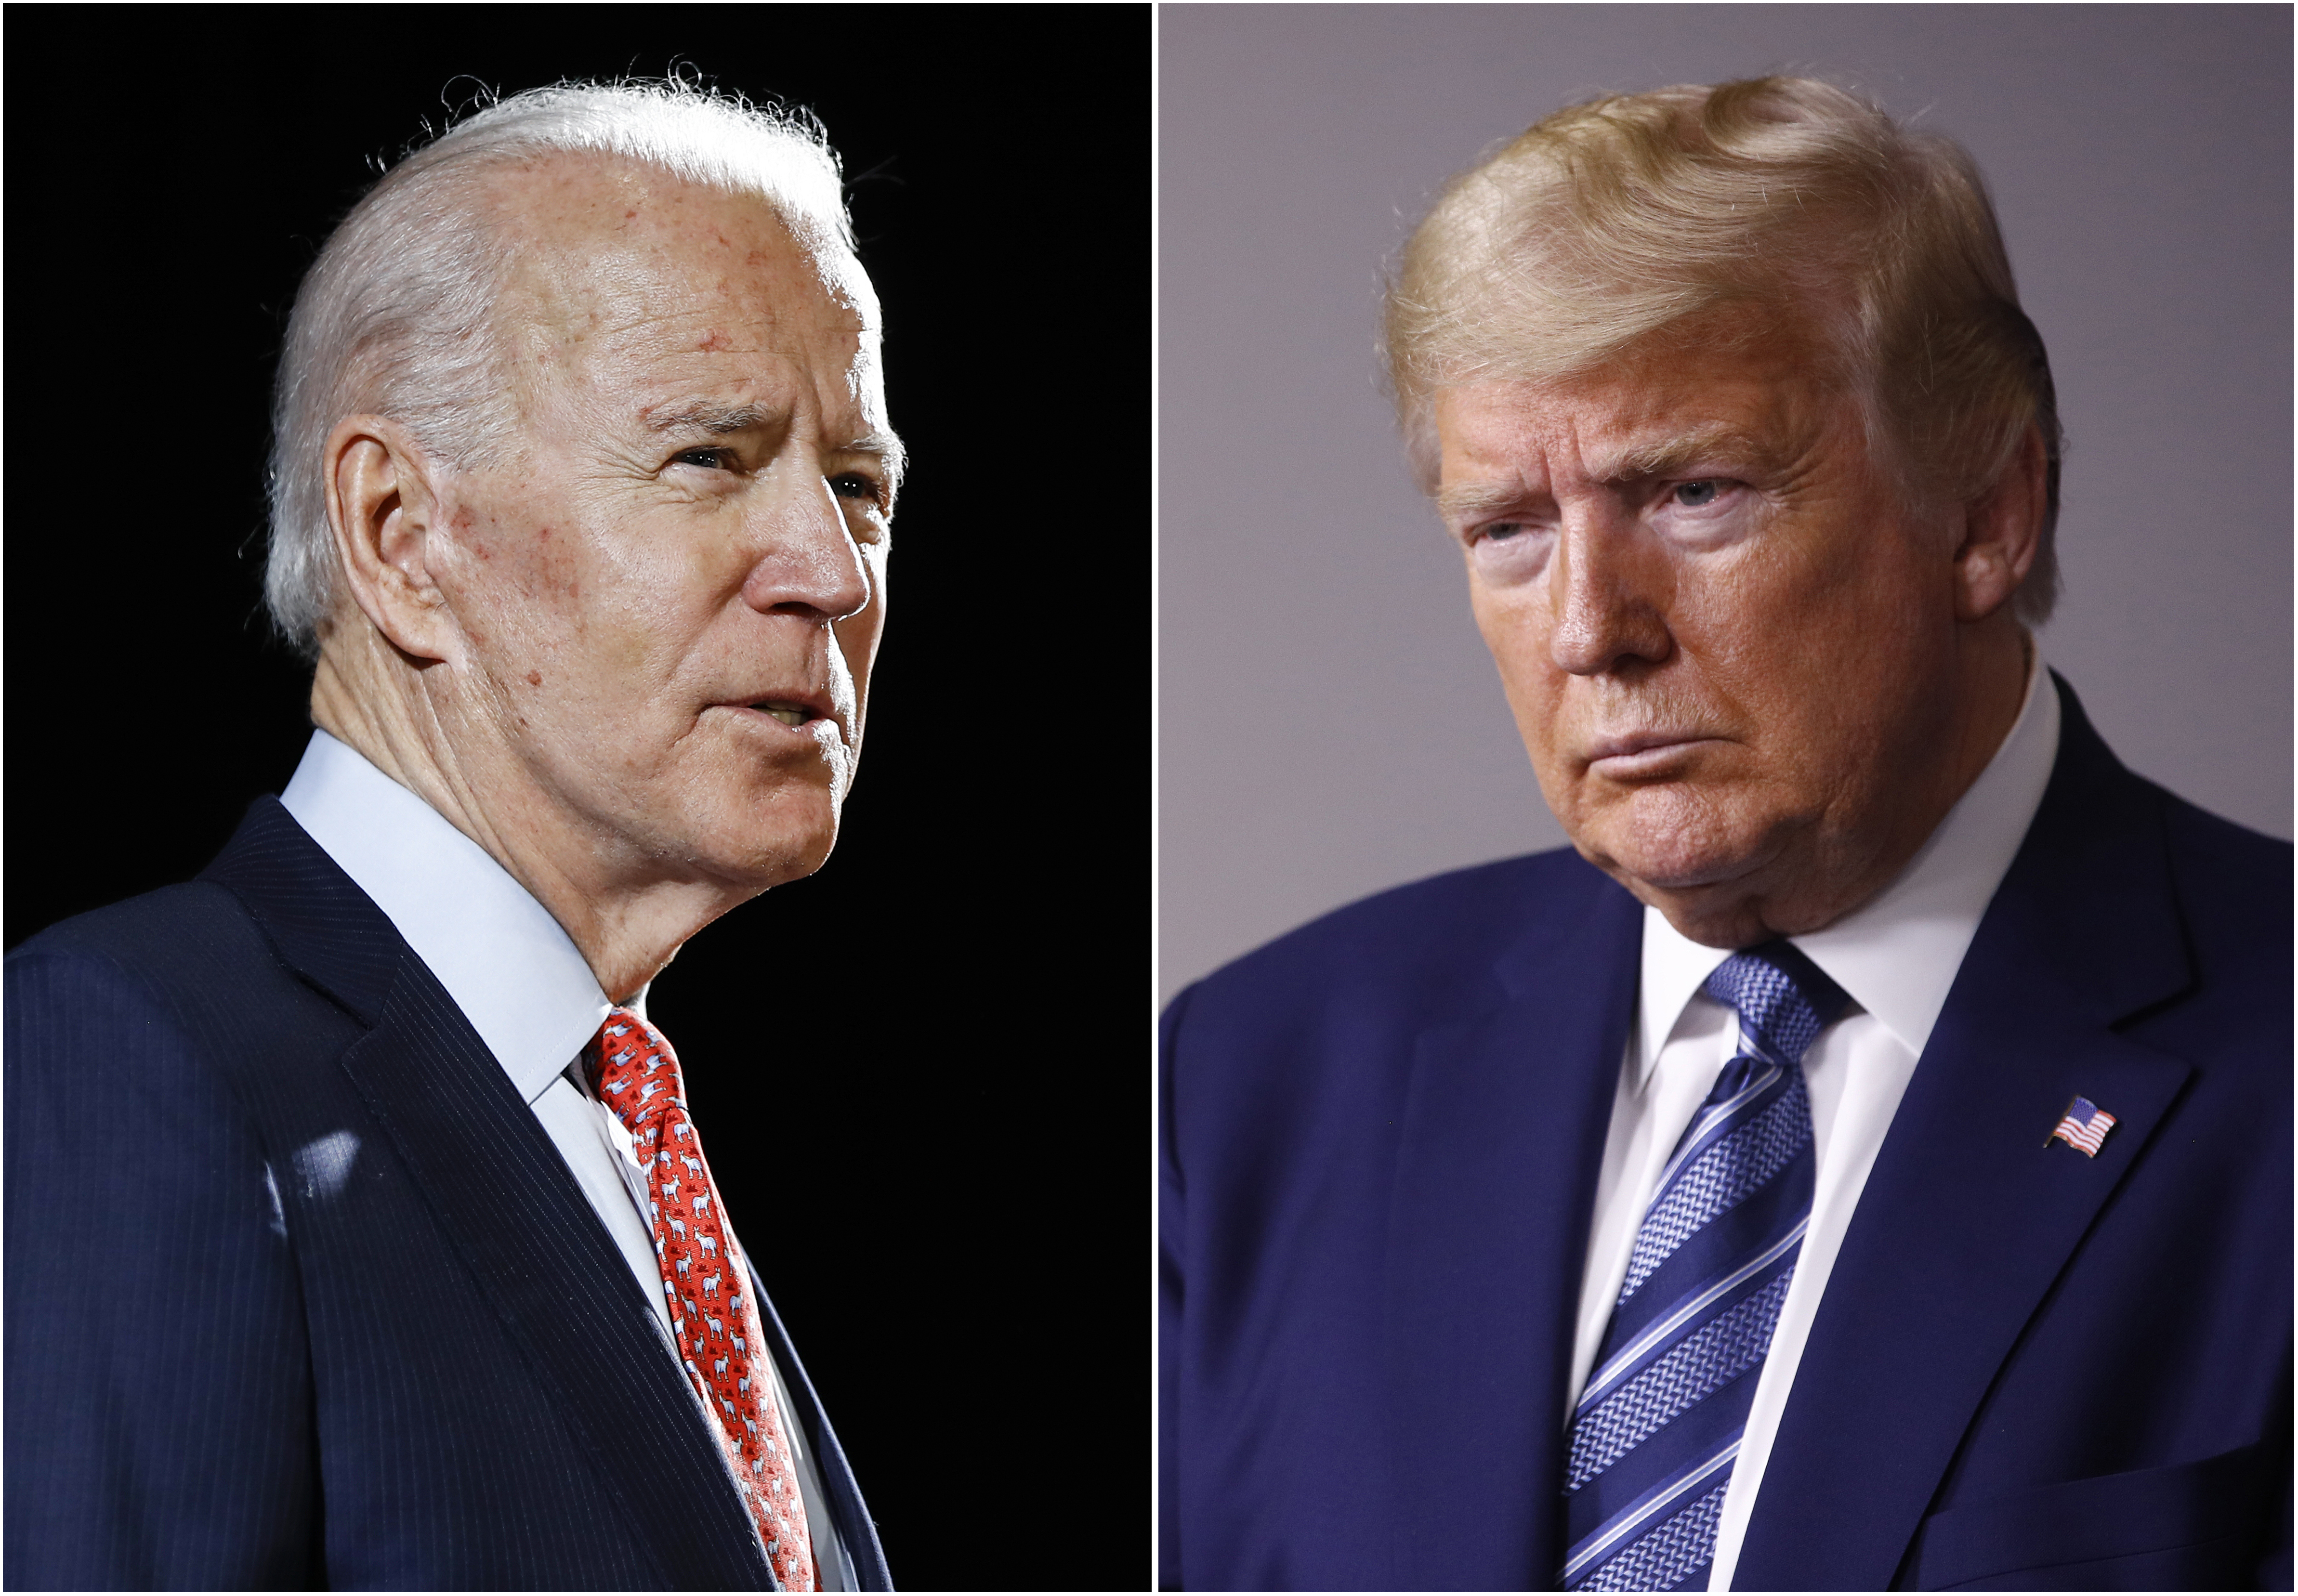 New Texas poll shows tie between Trump and Biden, soft support